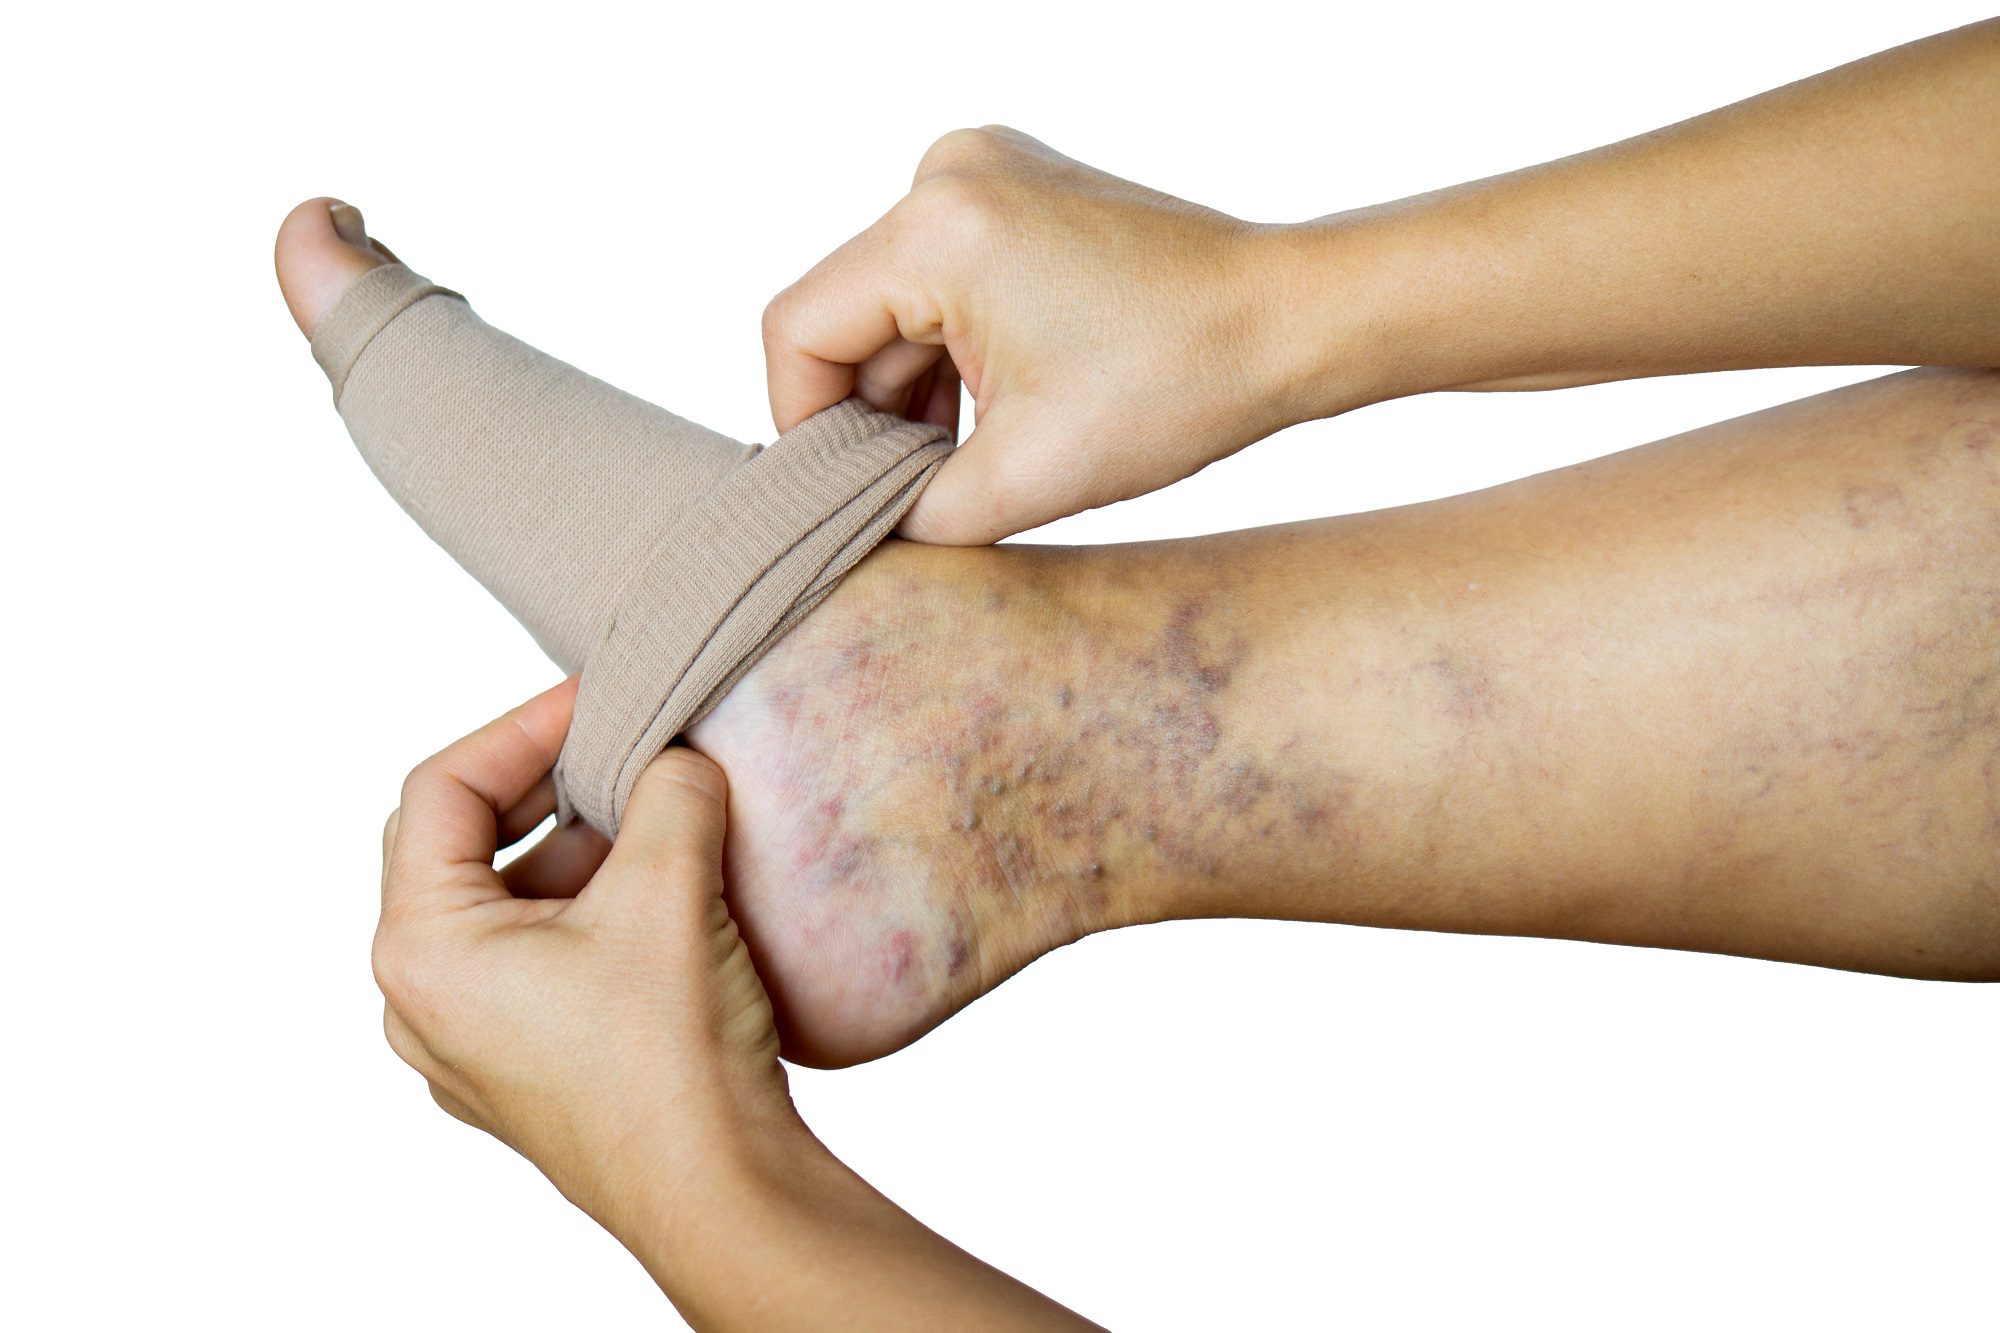 Will Compression Hose Help My Varicose Veins? - Advancing Your Health